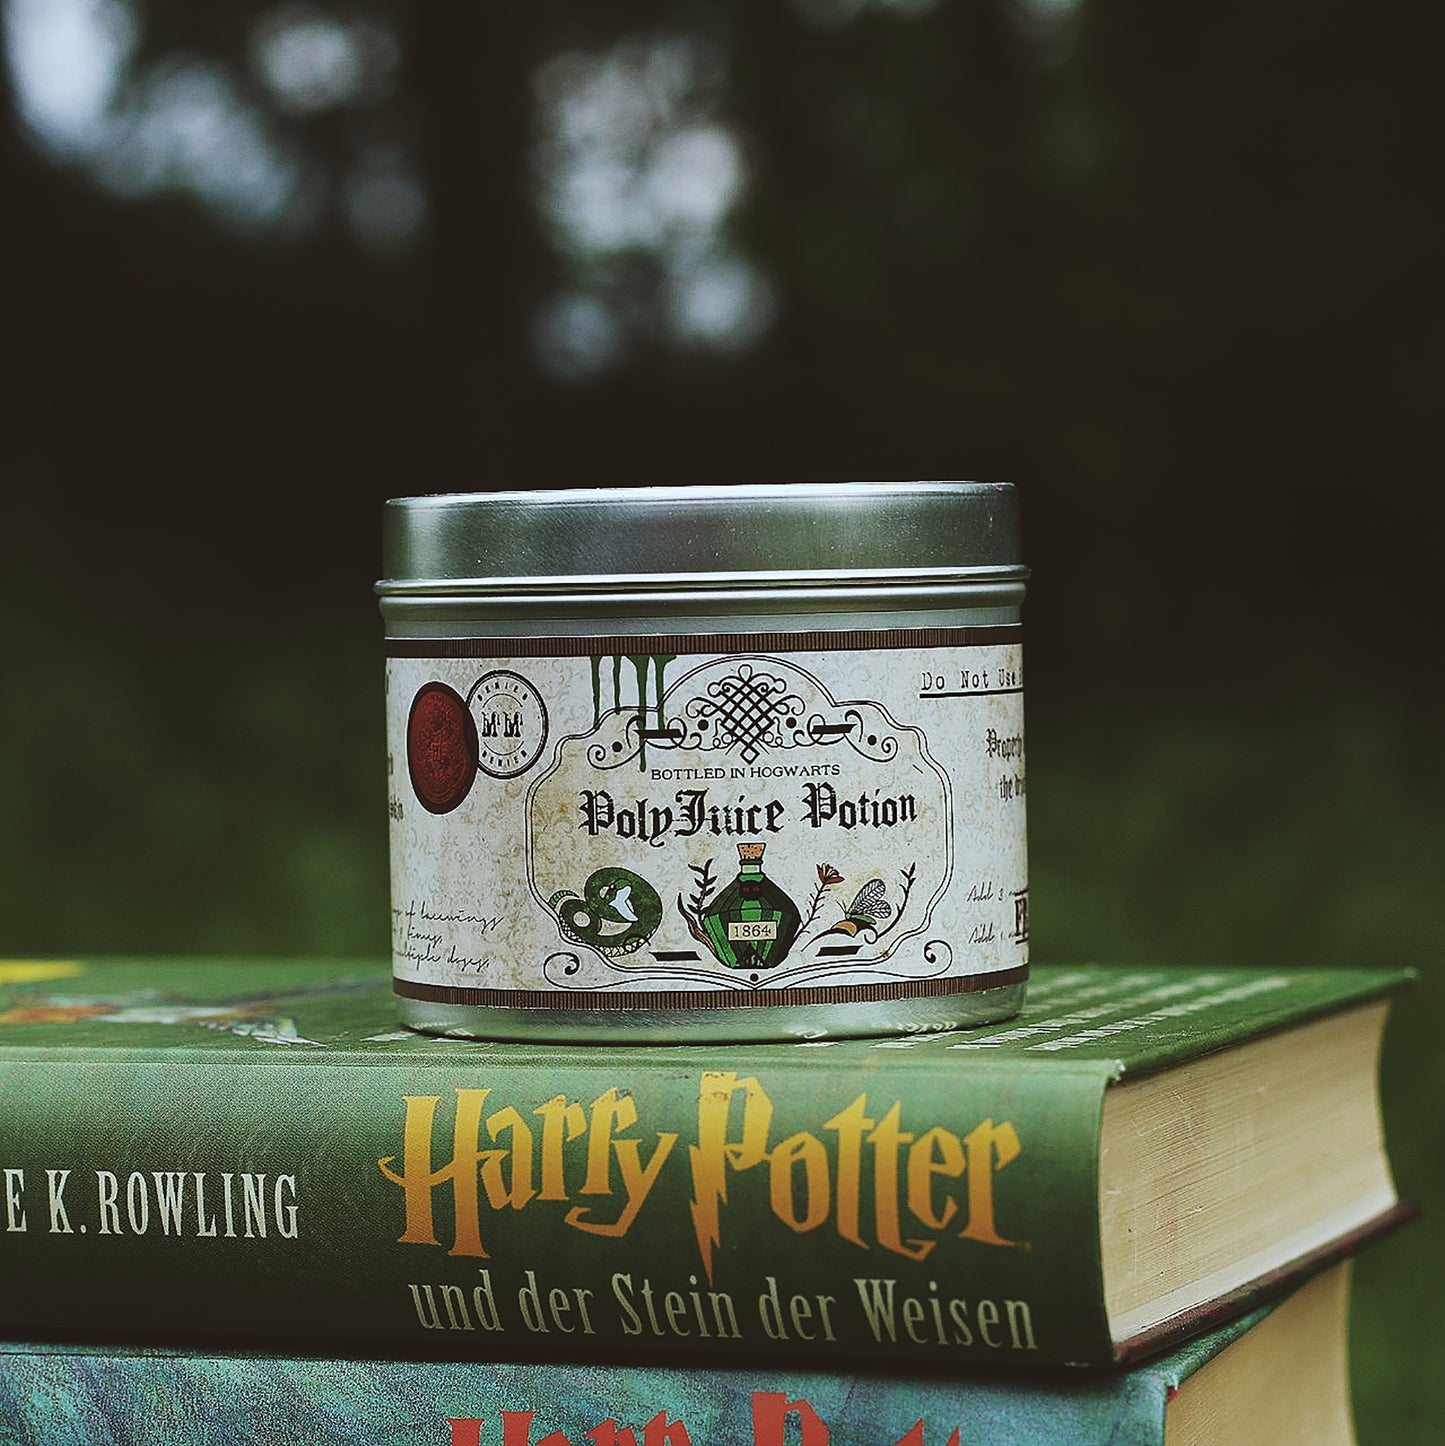 Polyjuice Potion scented candle on top of Harry Potter books.